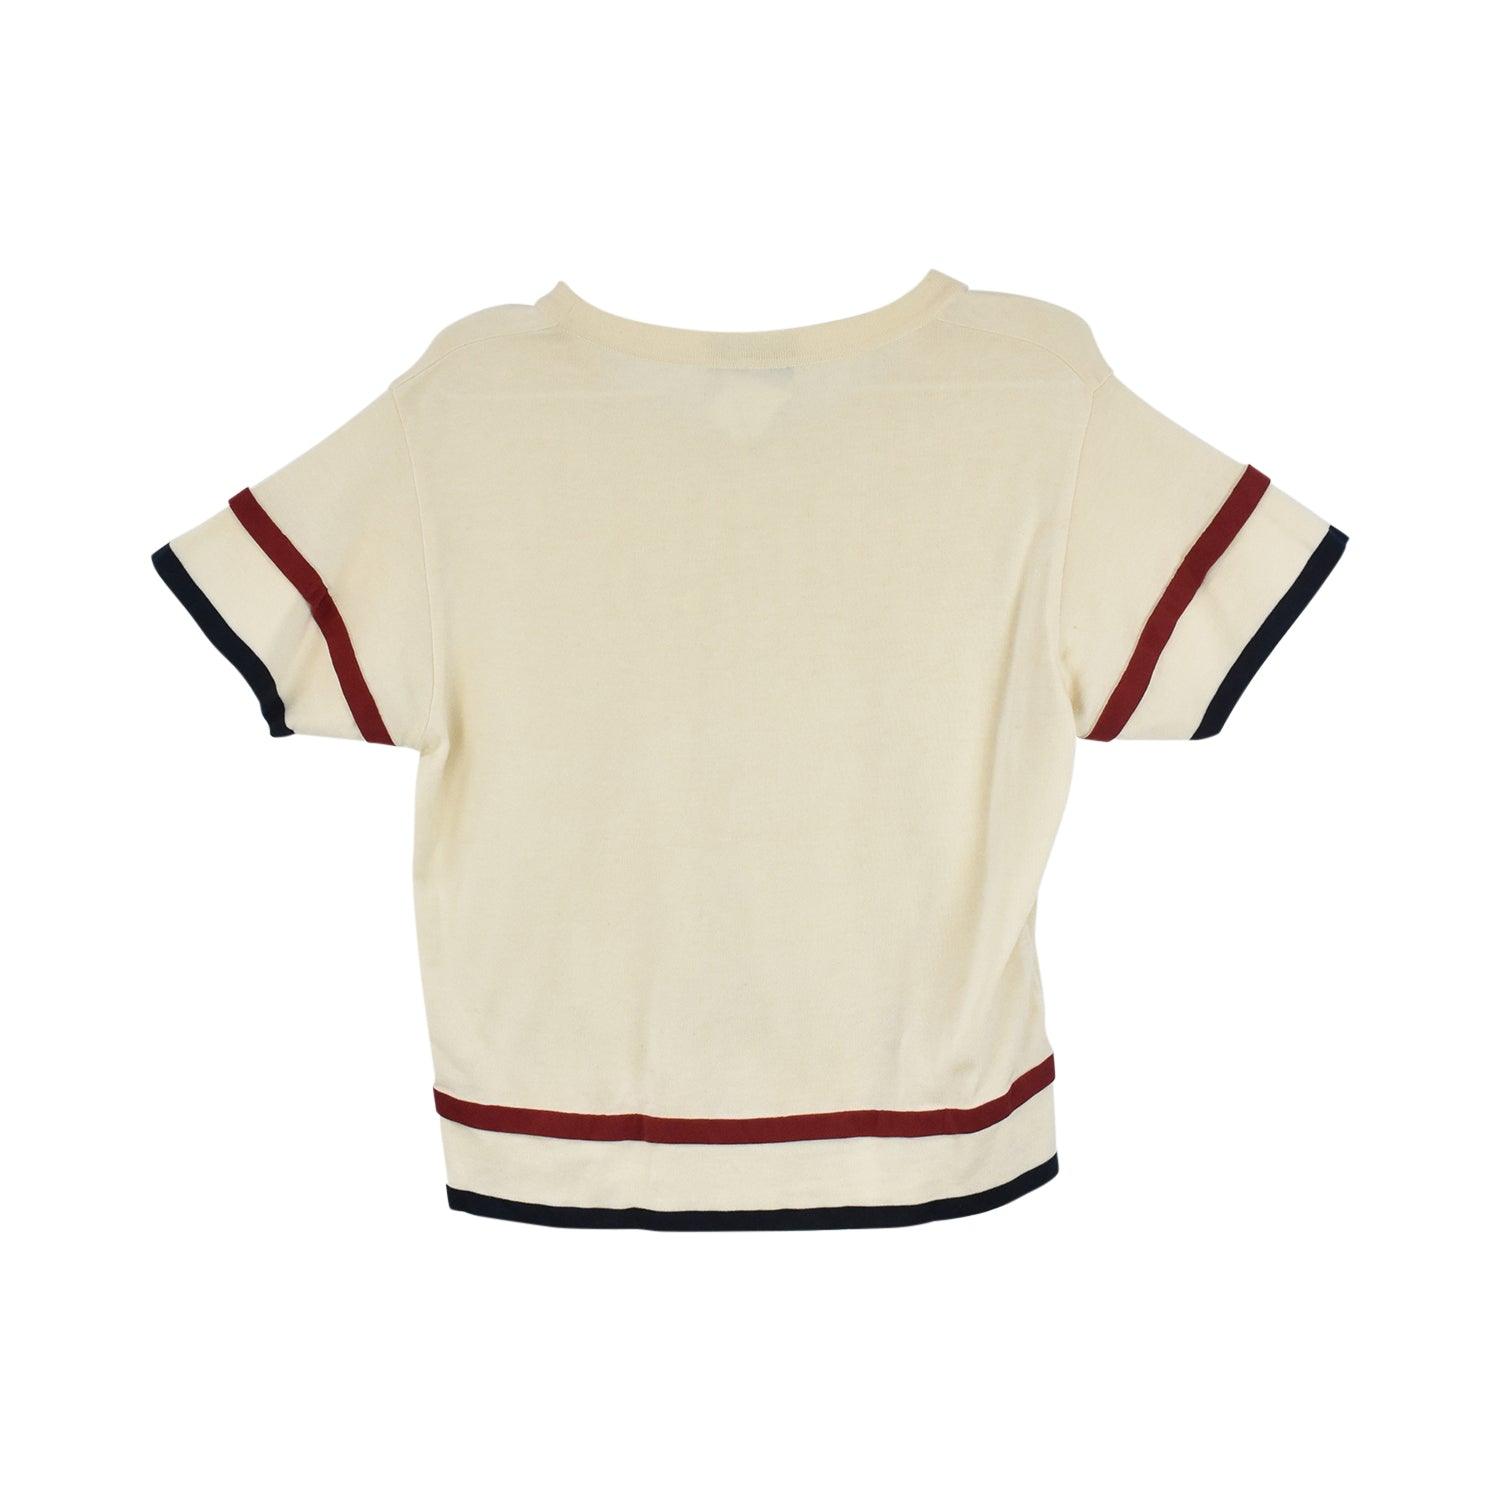 Chanel Top - Women's 40 - Fashionably Yours